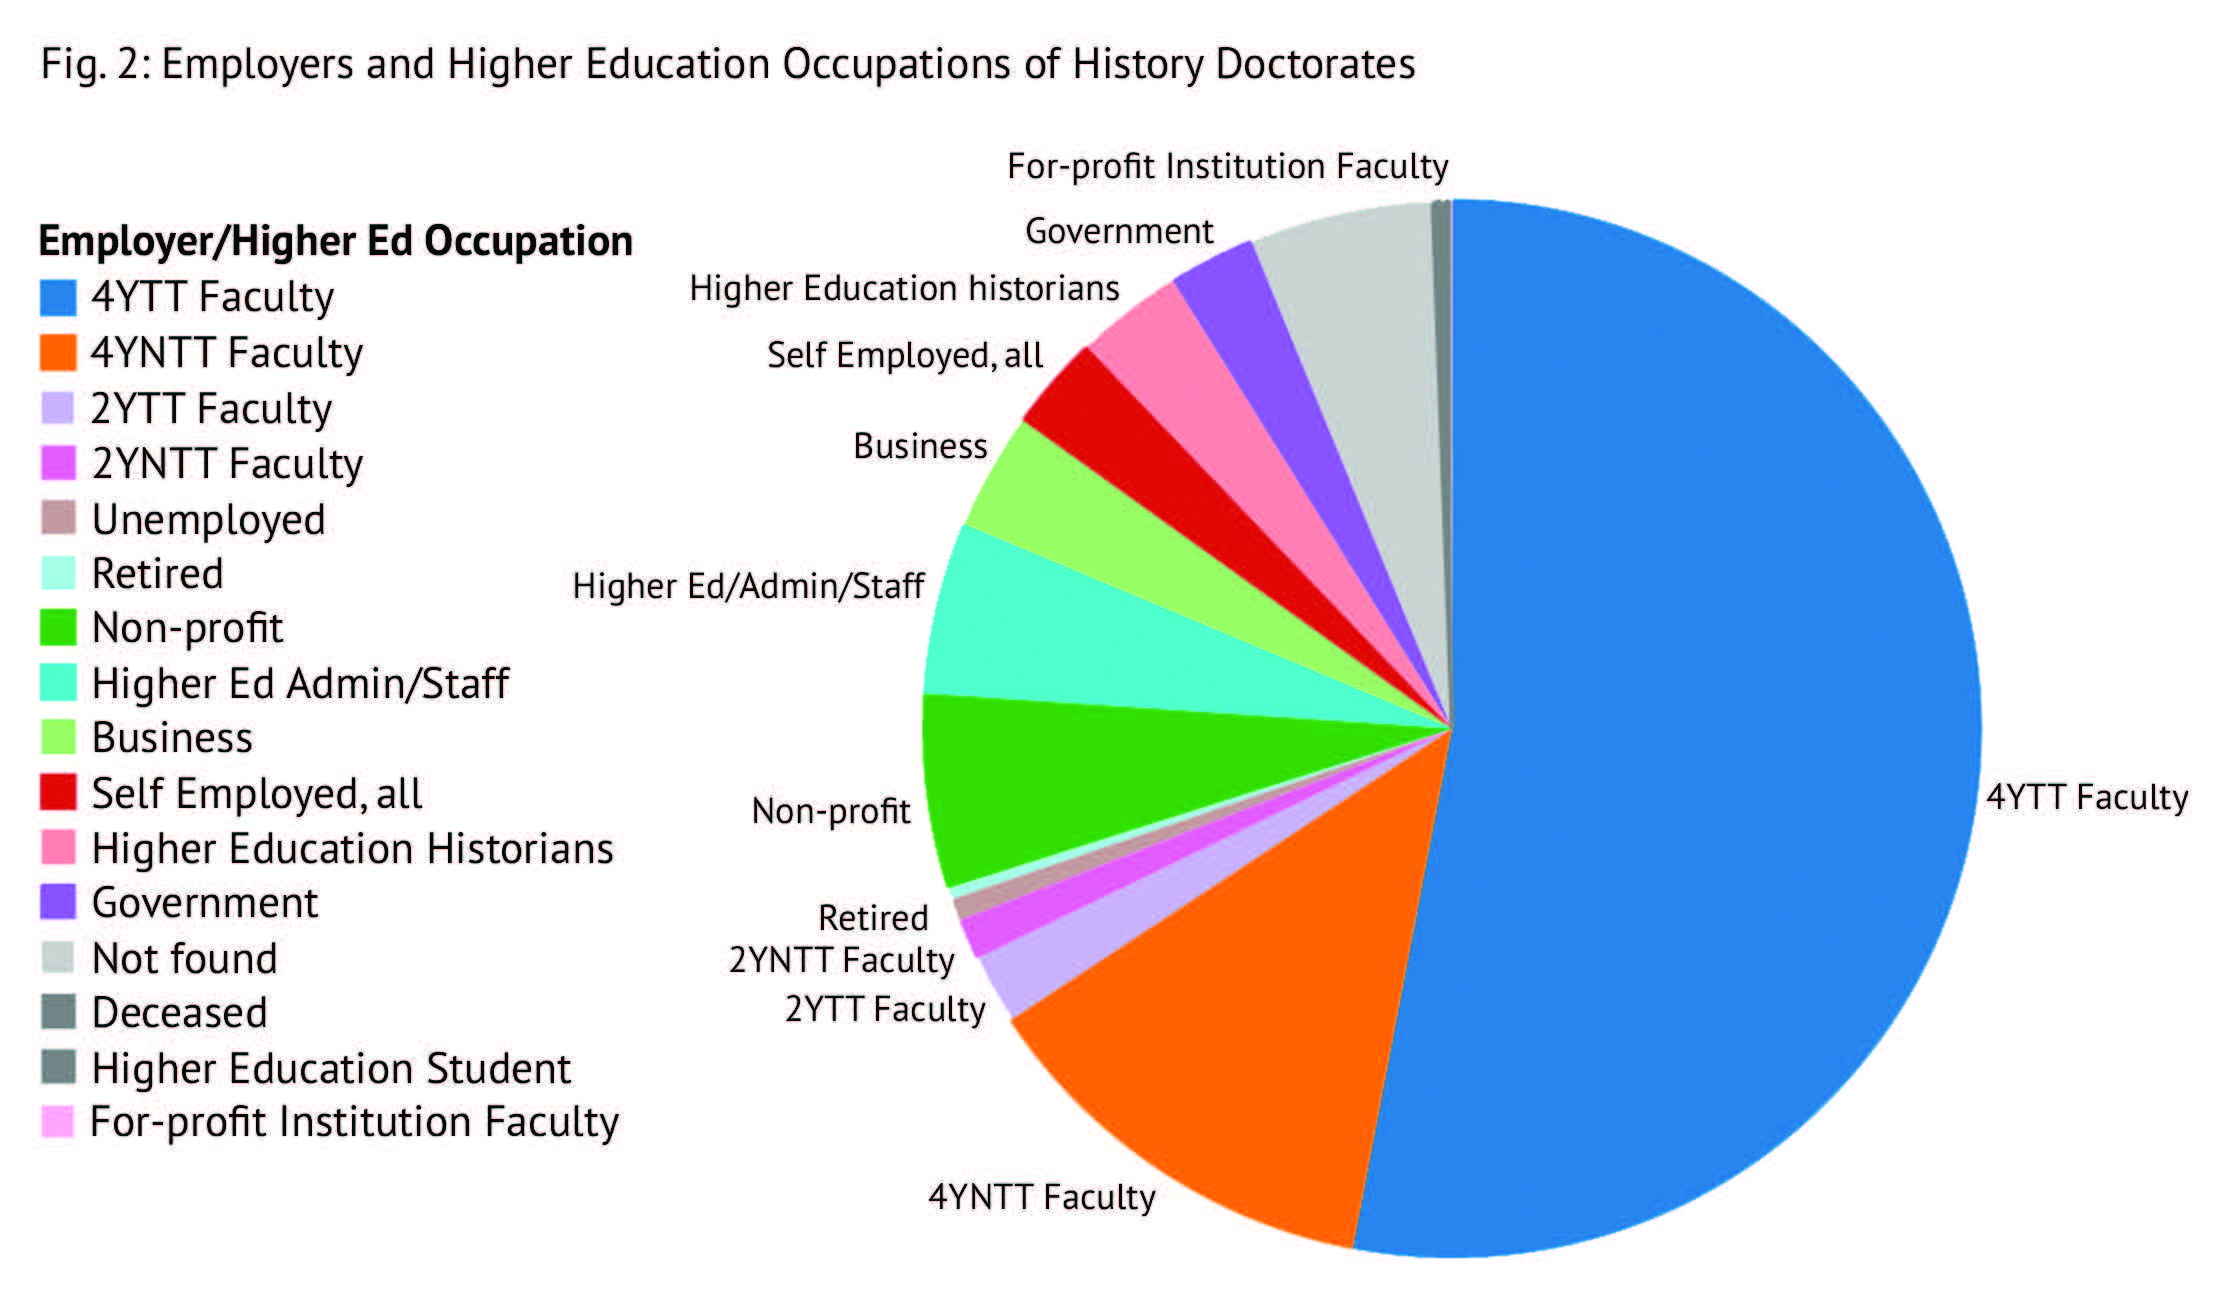 History doctorates work in all employment sectors. Around three-quarters of the doctorates the AHA tracked are employed by institutions of higher education, most in teaching positions. In the pie chart above, these higher education employees are divided into more specific occupational categories, including four- and two-year tenure-track and non-tenure-track faculty (labeled 4YTT, 4YNTT, 2YTT, and 2YNTT).